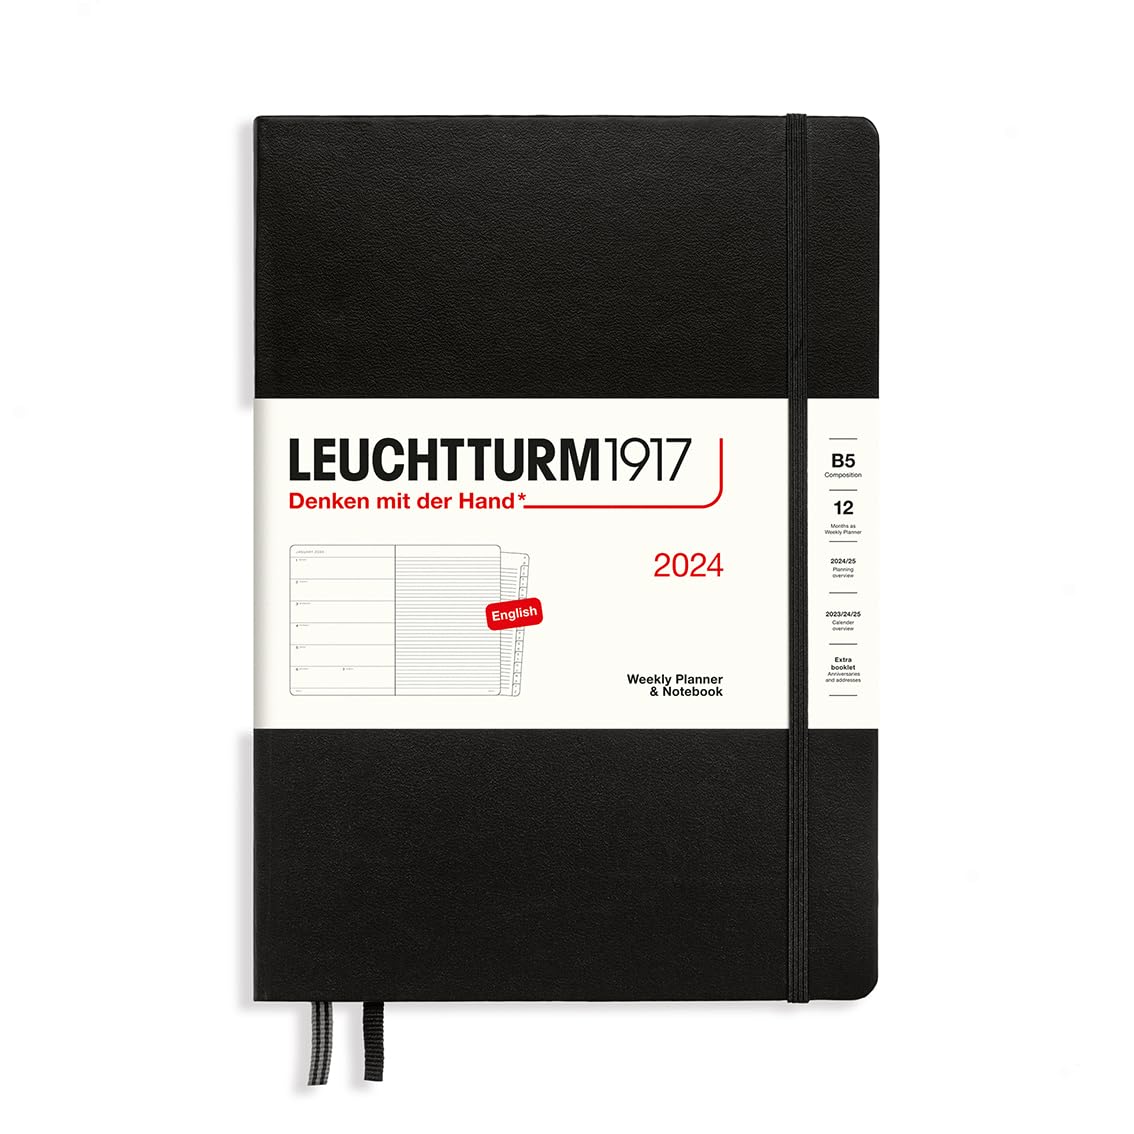 LEUCHTTURM1917 367764 Weekly Planner & Notebook Composition (B5) 2024, with booklet, Black, English